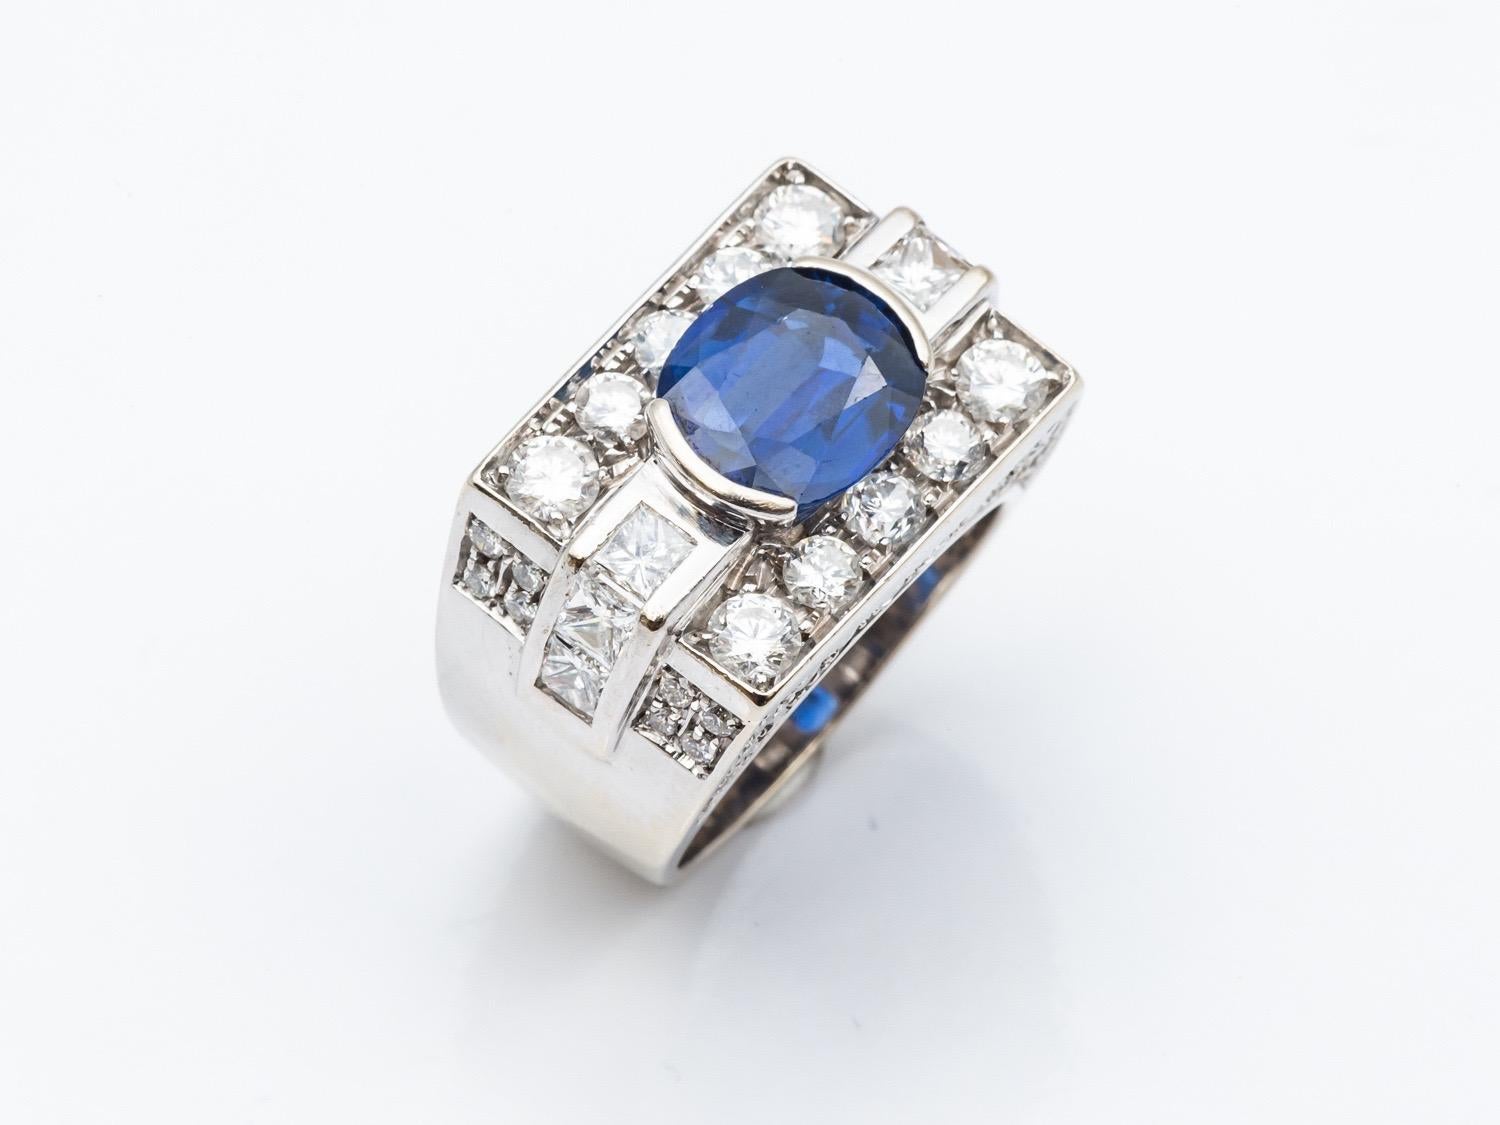 Ring Certified Madagascar Sapphire Diamonds White Gold 18 Karat   In Excellent Condition For Sale In Vannes, FR